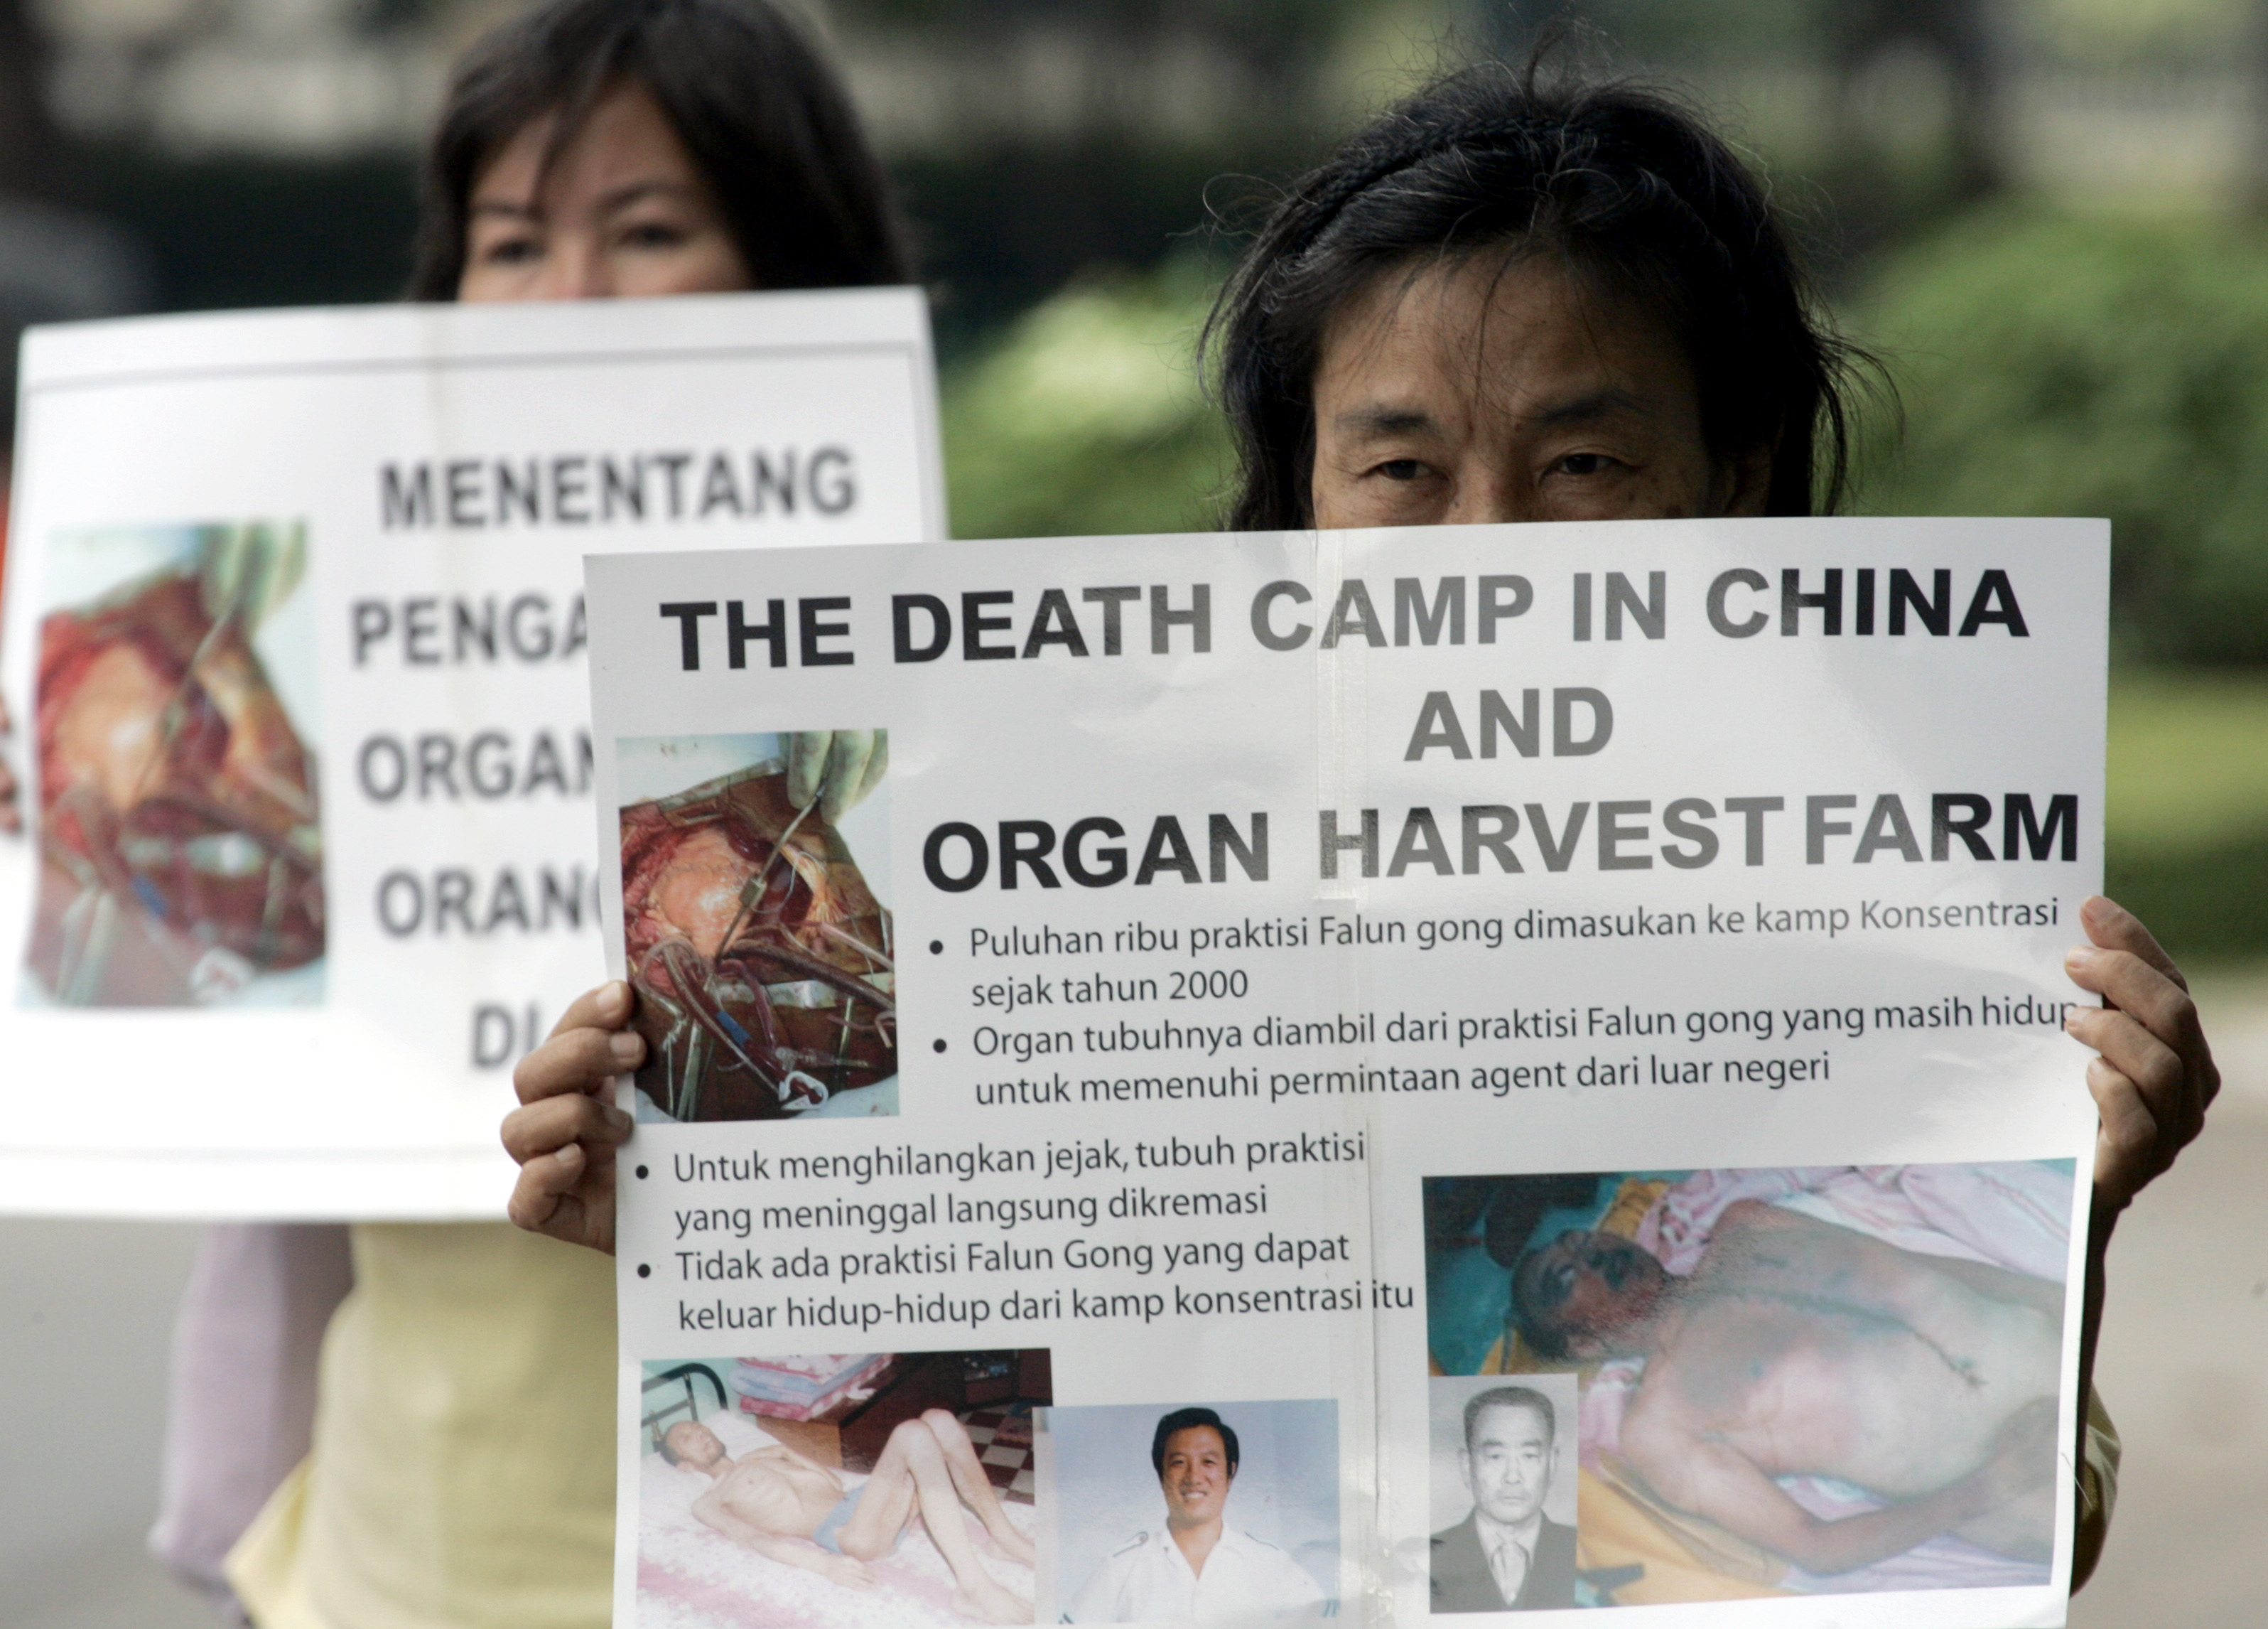 Indonesian Falun Gong followers carry placards during a protest in front of U.S. embassy in Jakarta April 19, 2006. REUTERS/Beawiharta